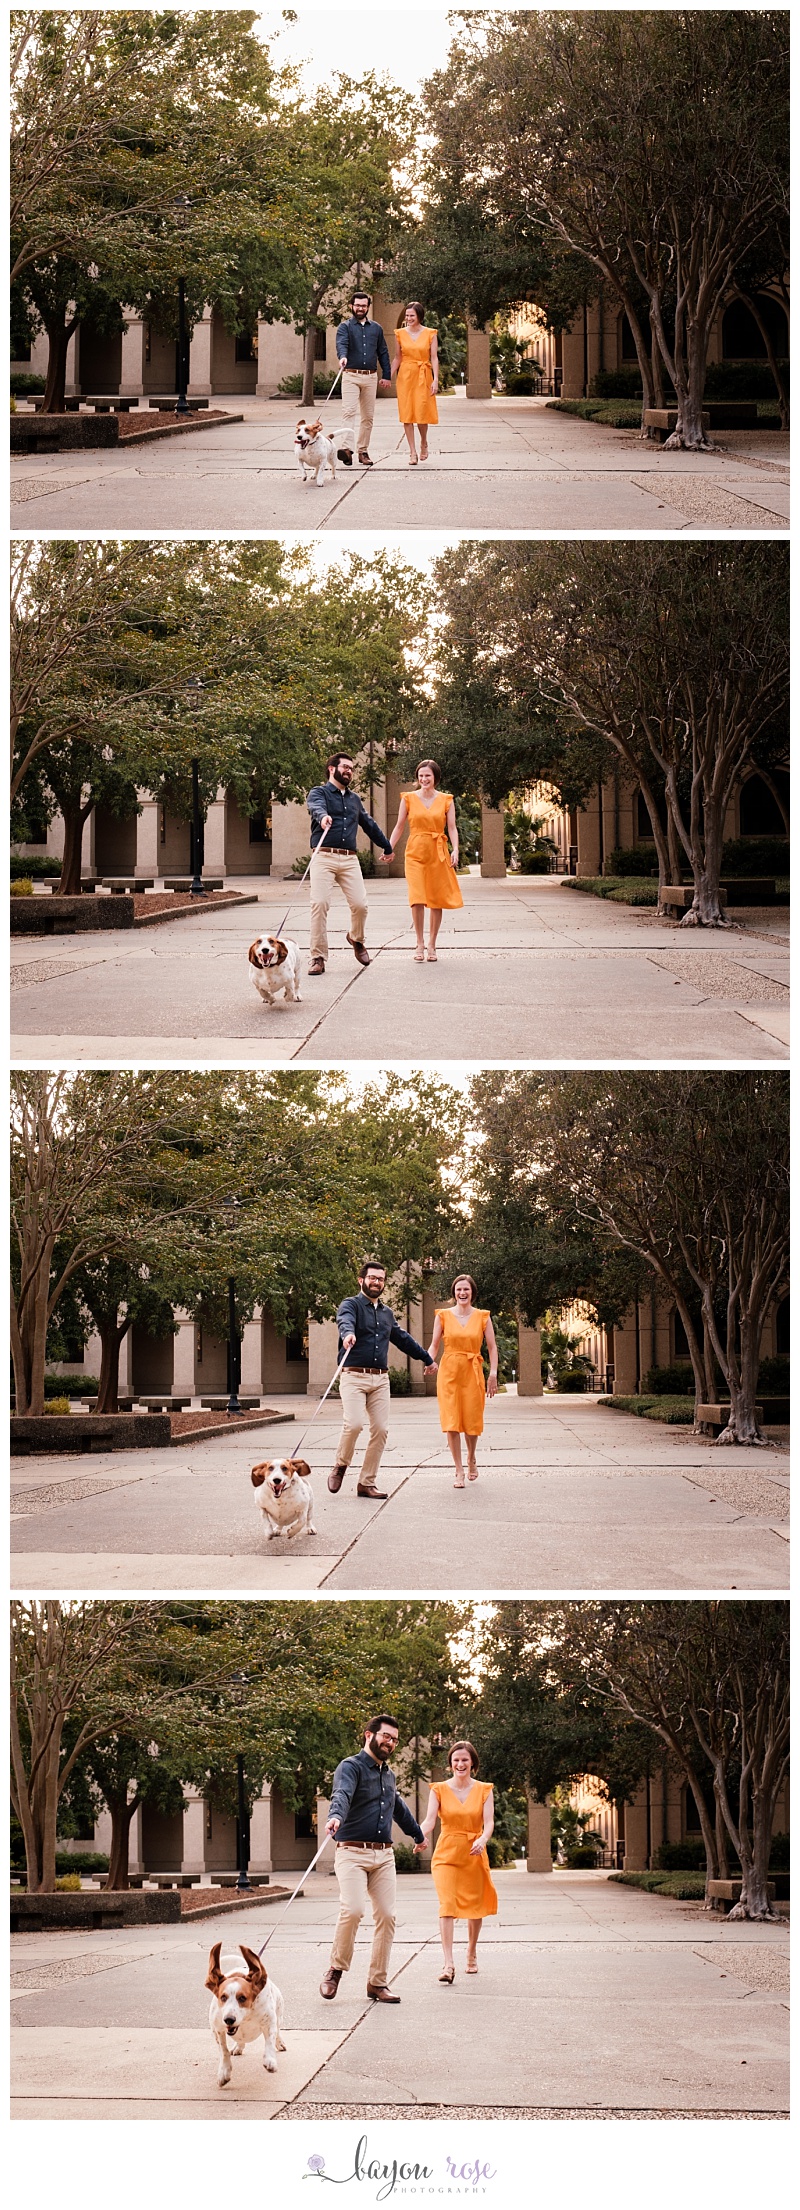 Dog running away from owners during engagement photo session